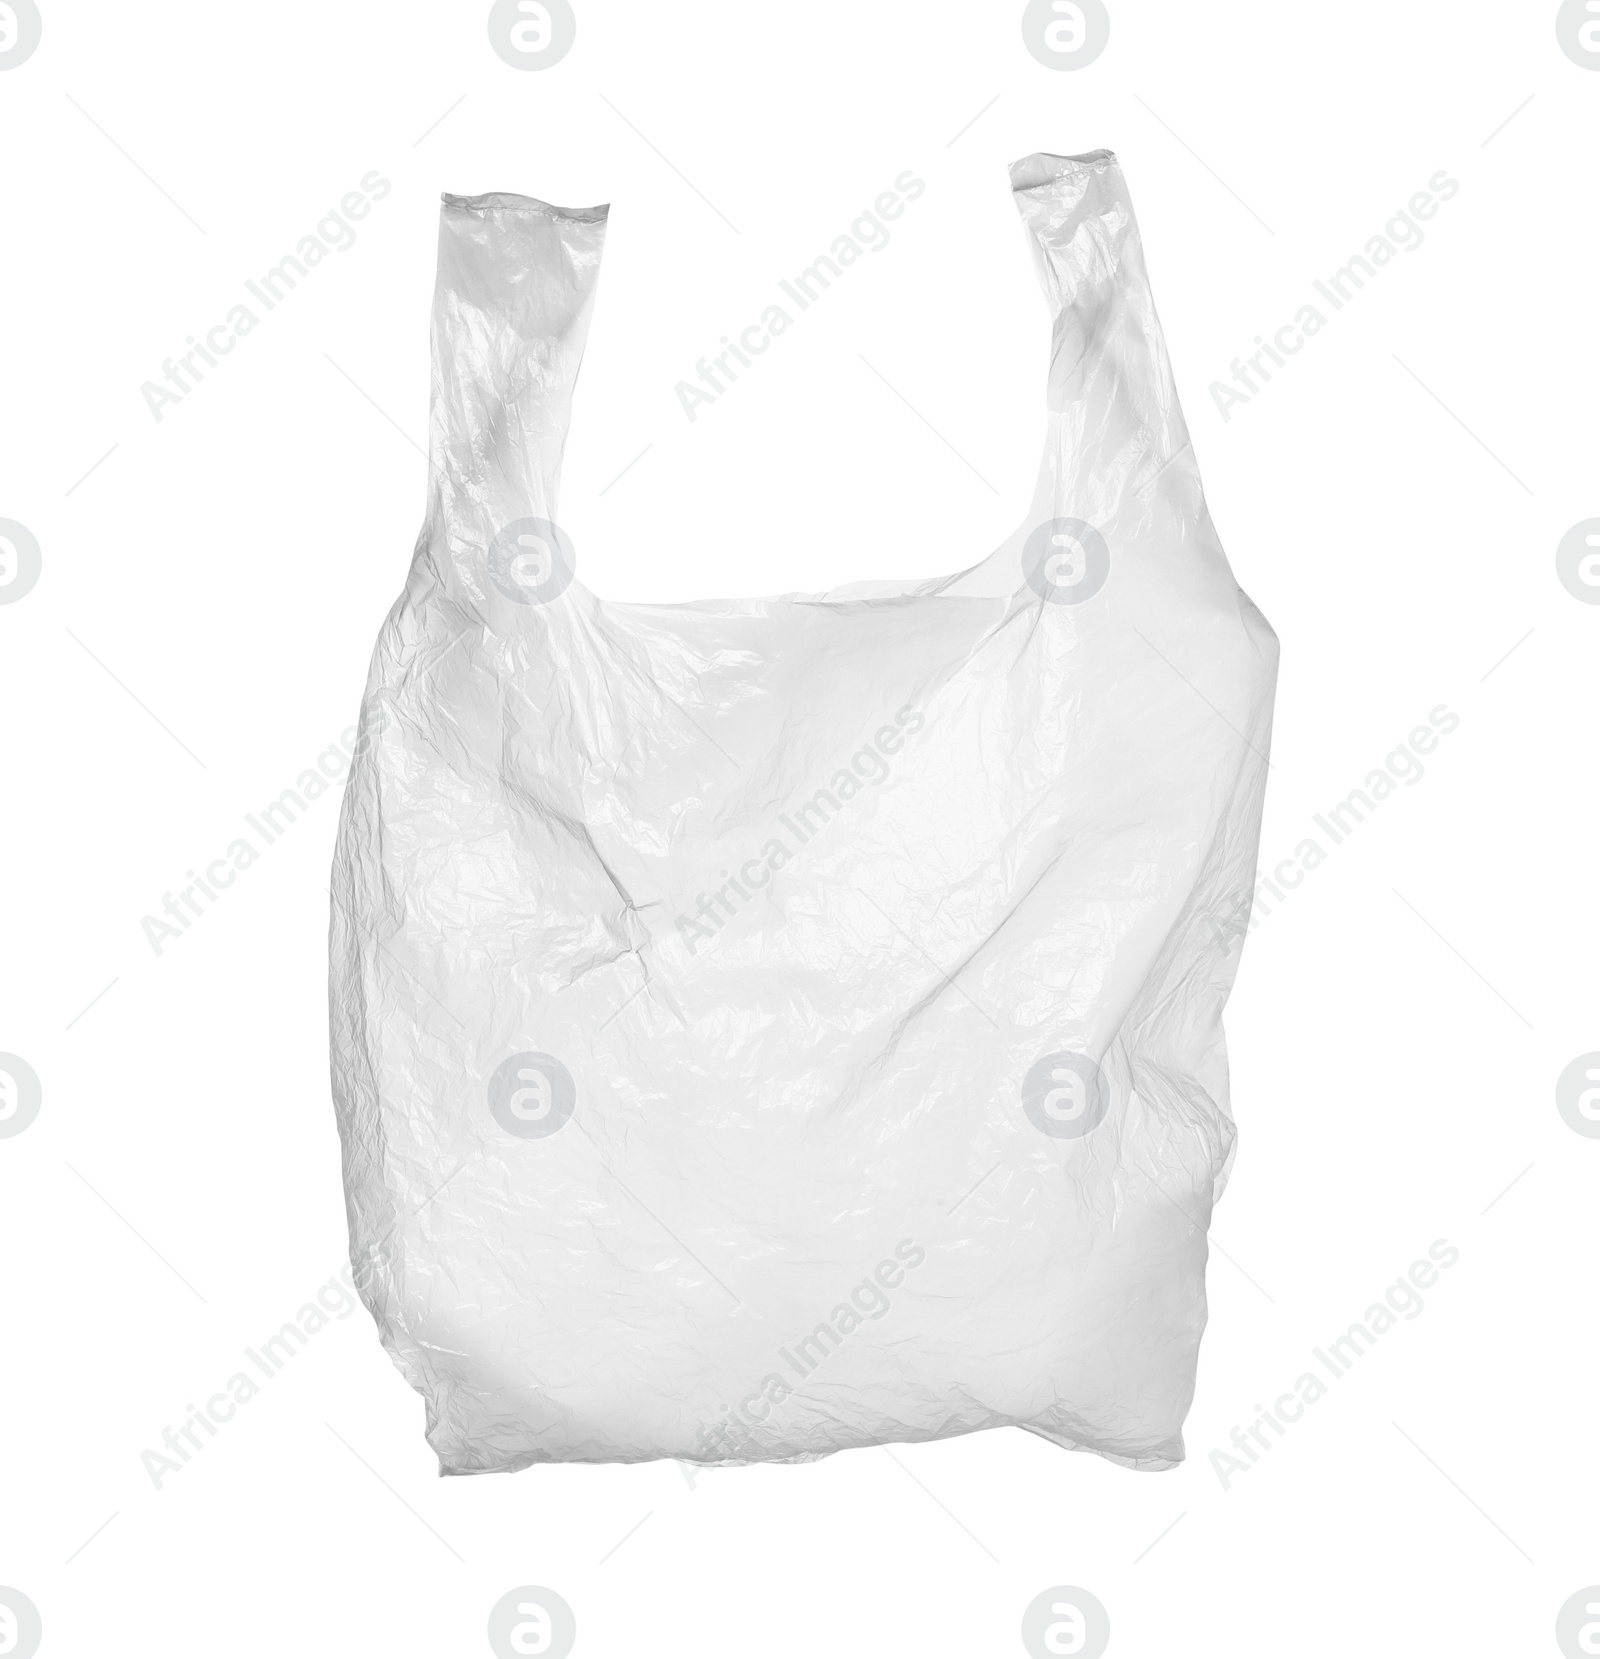 Photo of One empty plastic bag isolated on white